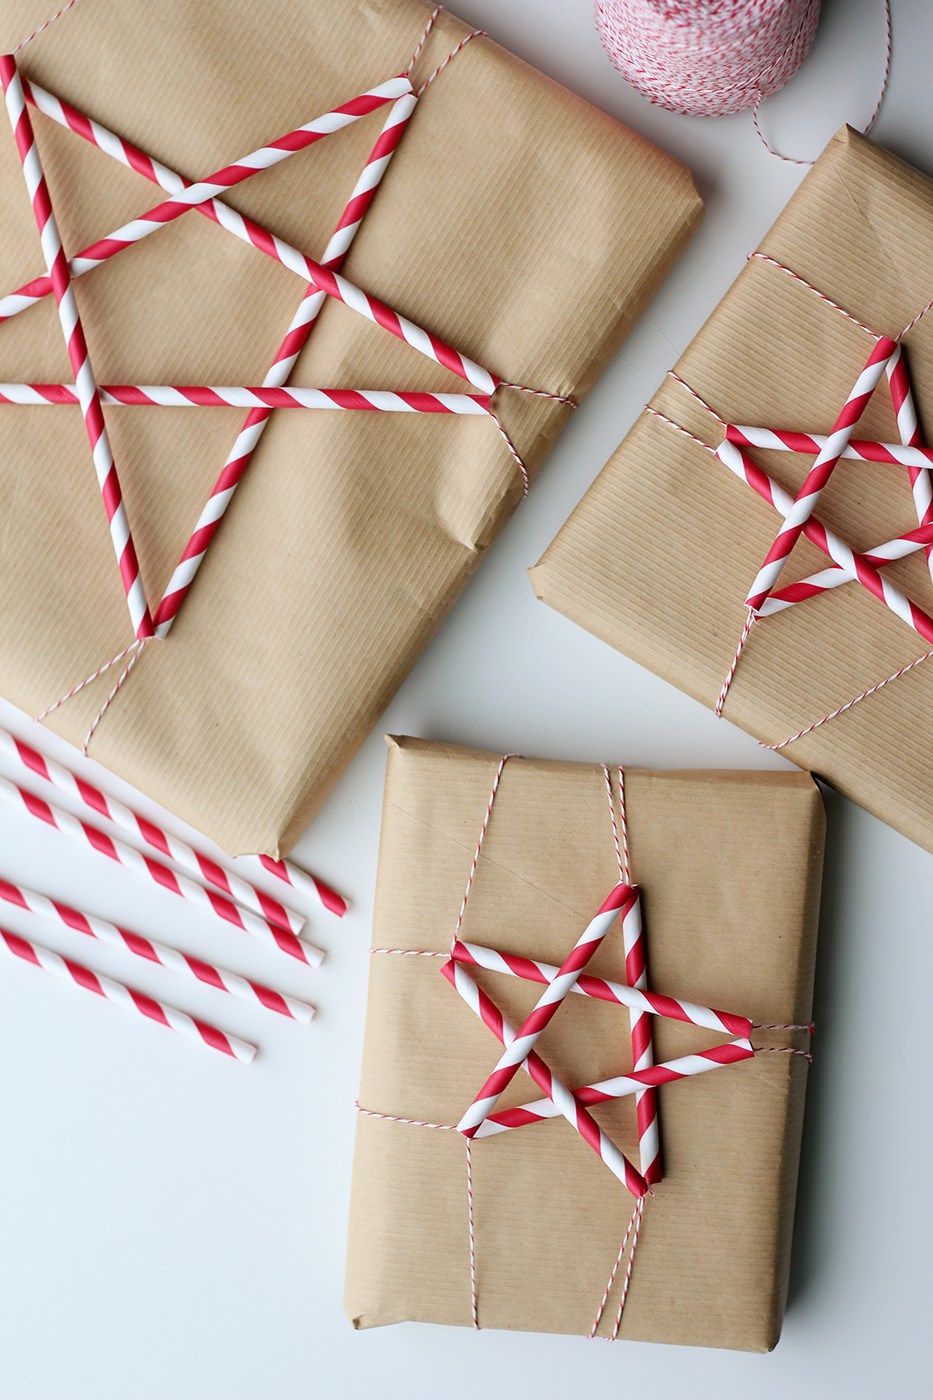 Gift wrapping ideas for Father's Day - clever ideas for the wow factor